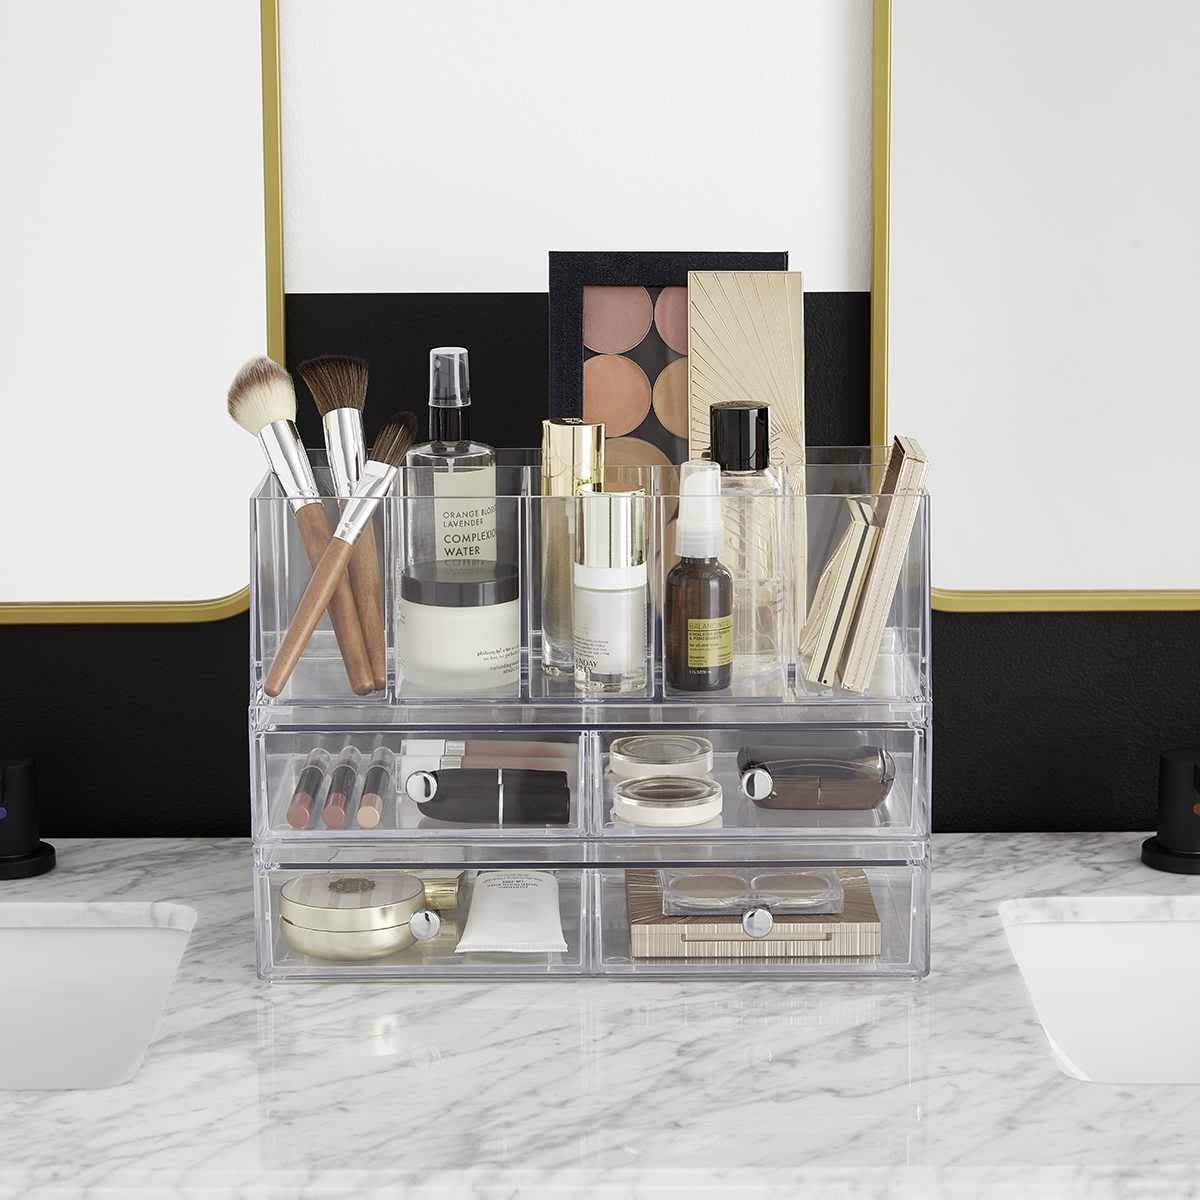 https://www.containerstore.com/catalogimages/365303/SU_19_Clarity-Cosmetic-Storage-Acryl.jpg